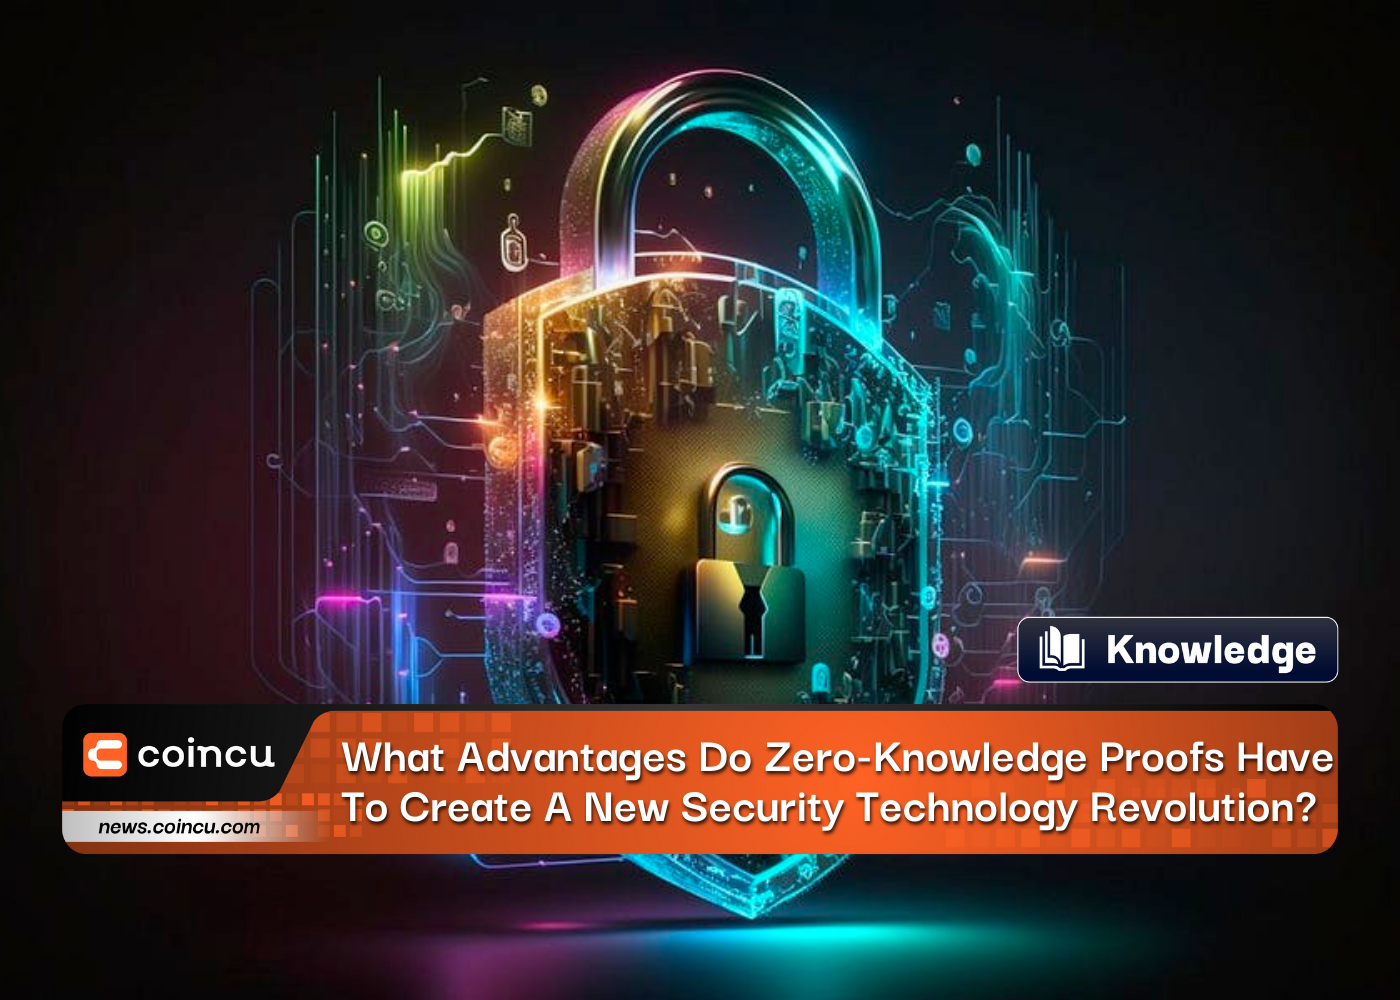 What Advantages Do Zero-Knowledge Proofs Have To Create A New Security Technology Revolution?